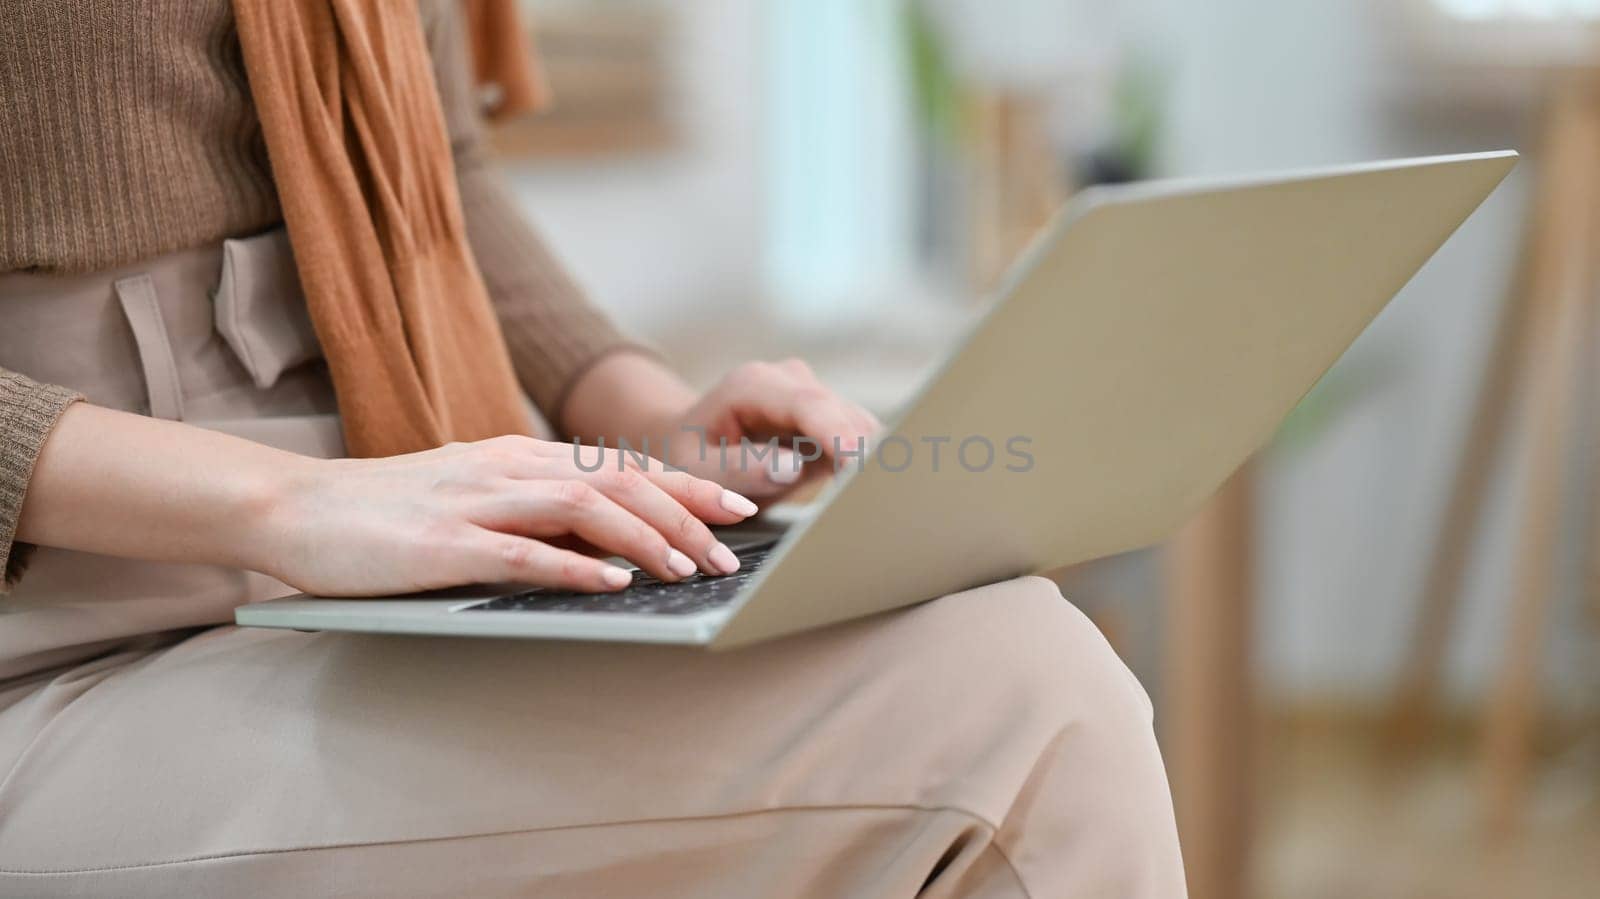 Cropped image of woman hands typing on laptop computer, studying remotely or browsing internet.